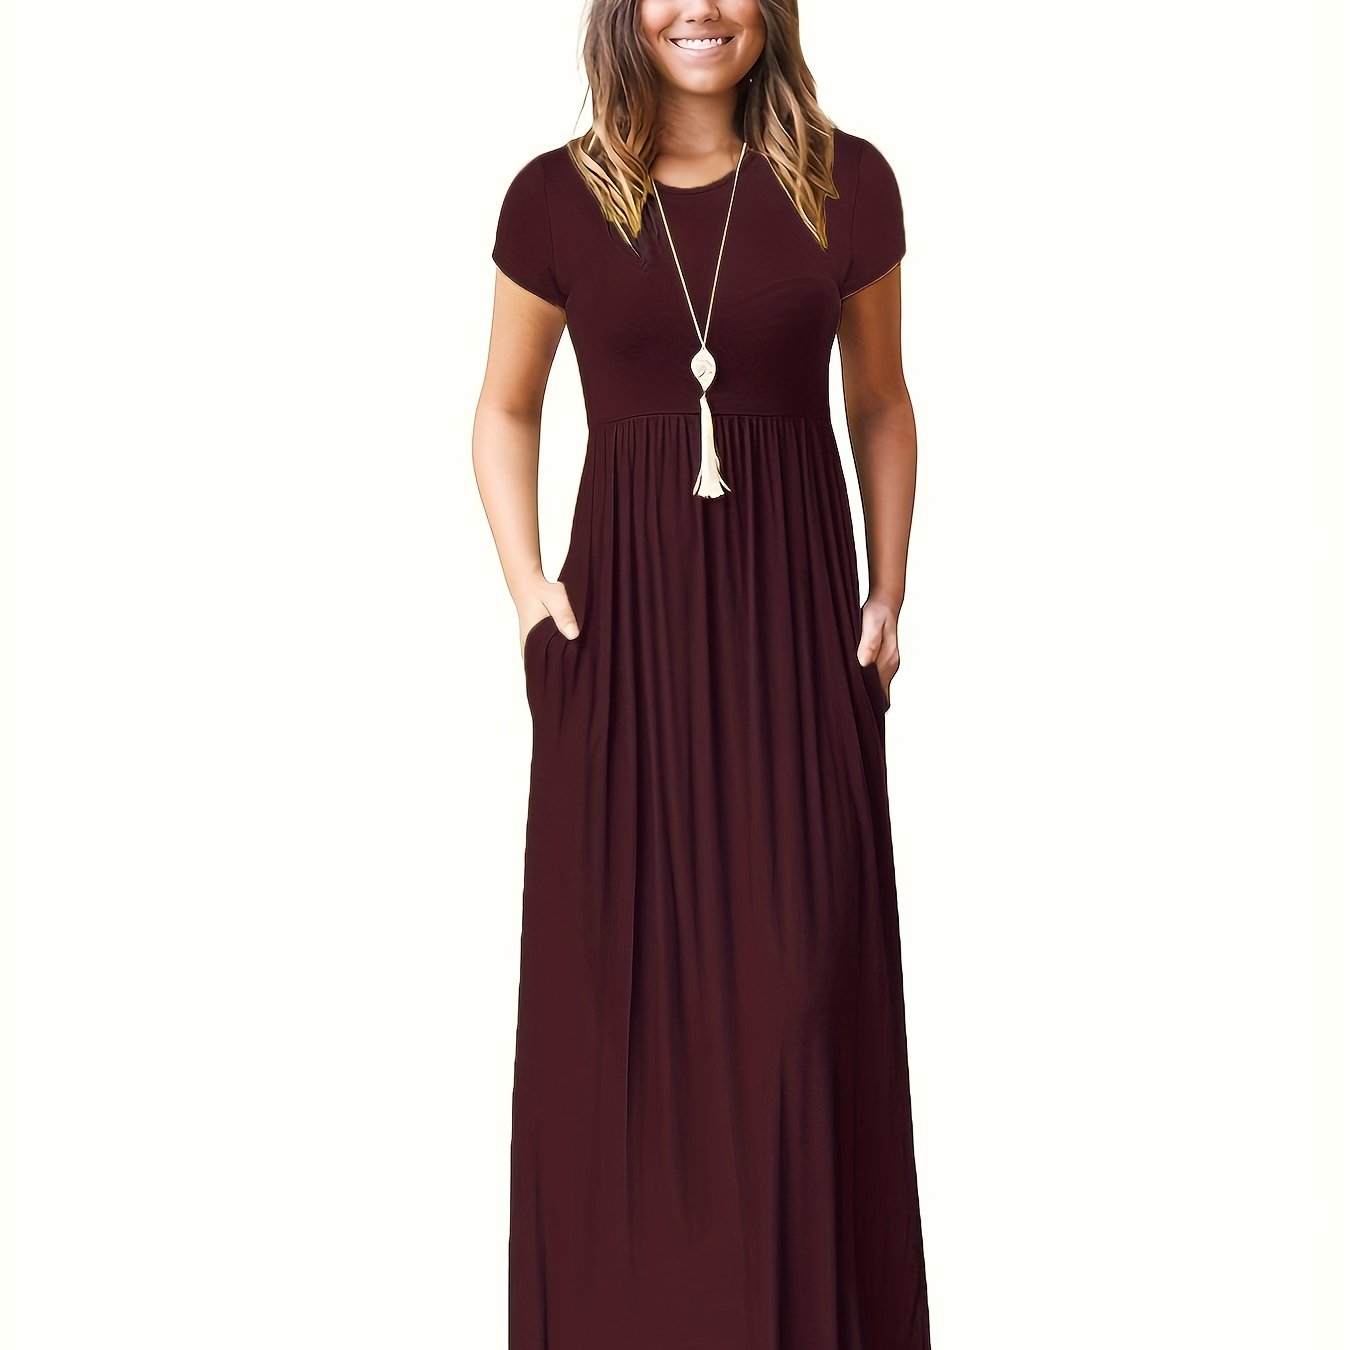 Antmvs Pleated Maxi Dress, Casual Crew Neck Short Sleeve Dress With Pockets, Women's Clothing